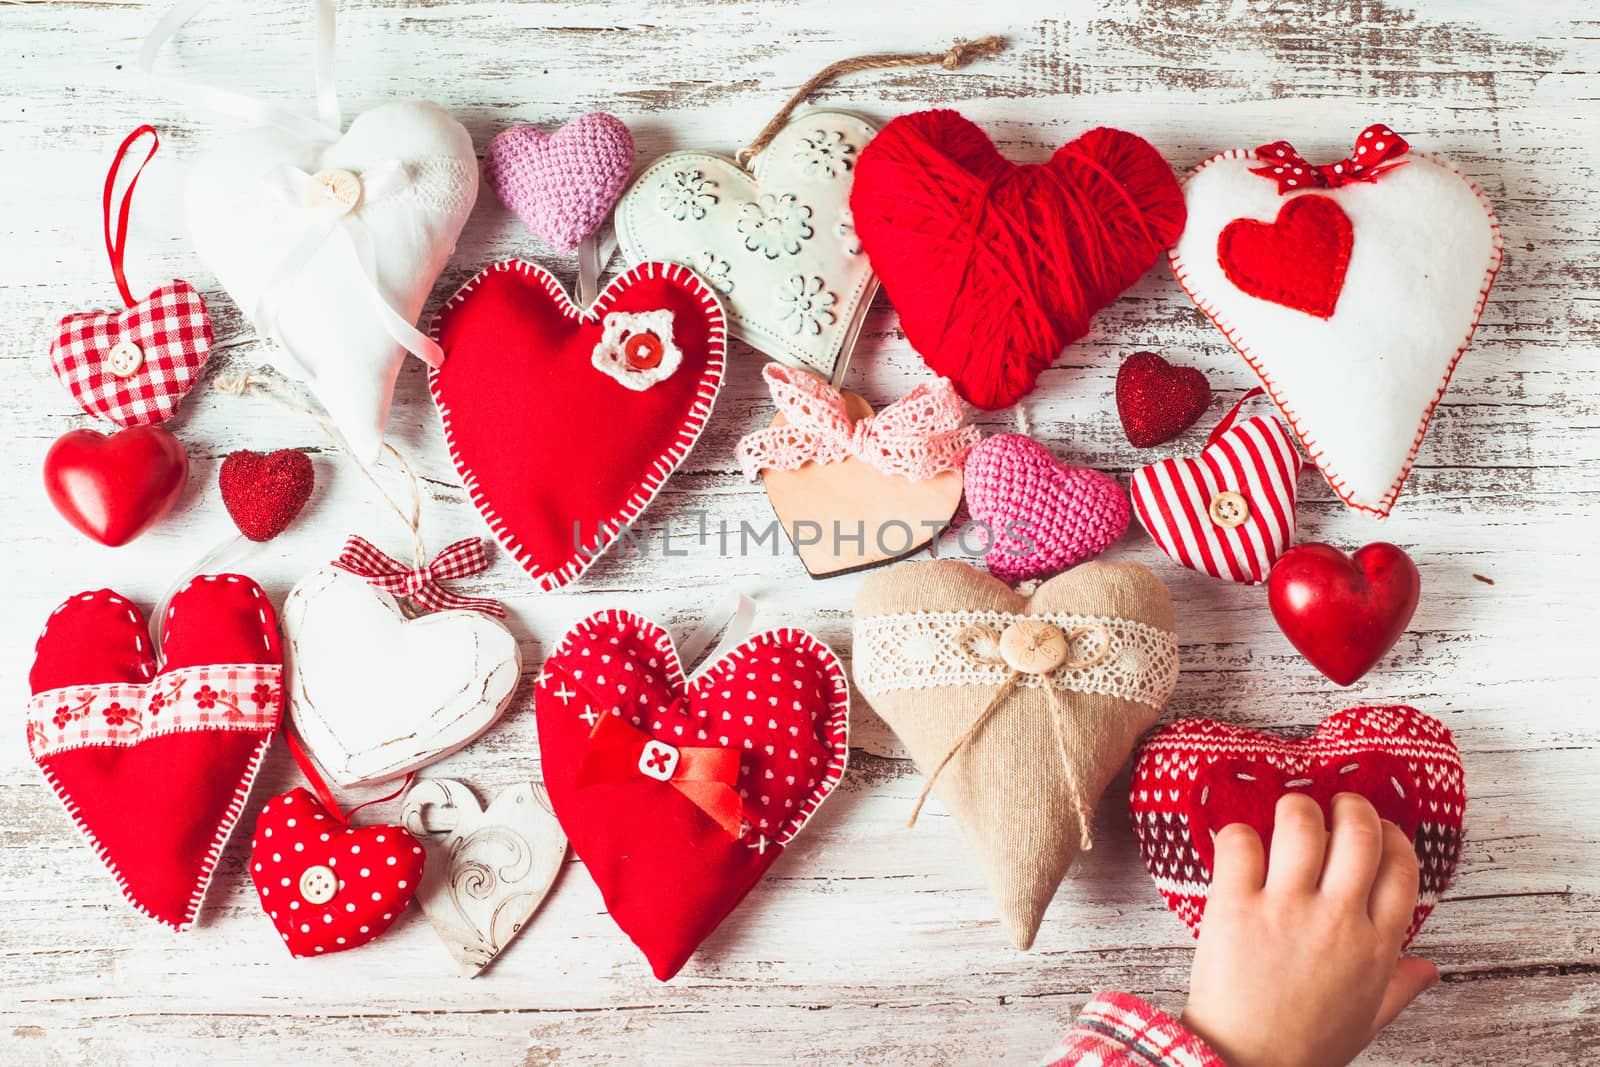 Valentine handmade hearts on the shabby wooden table and child's hand